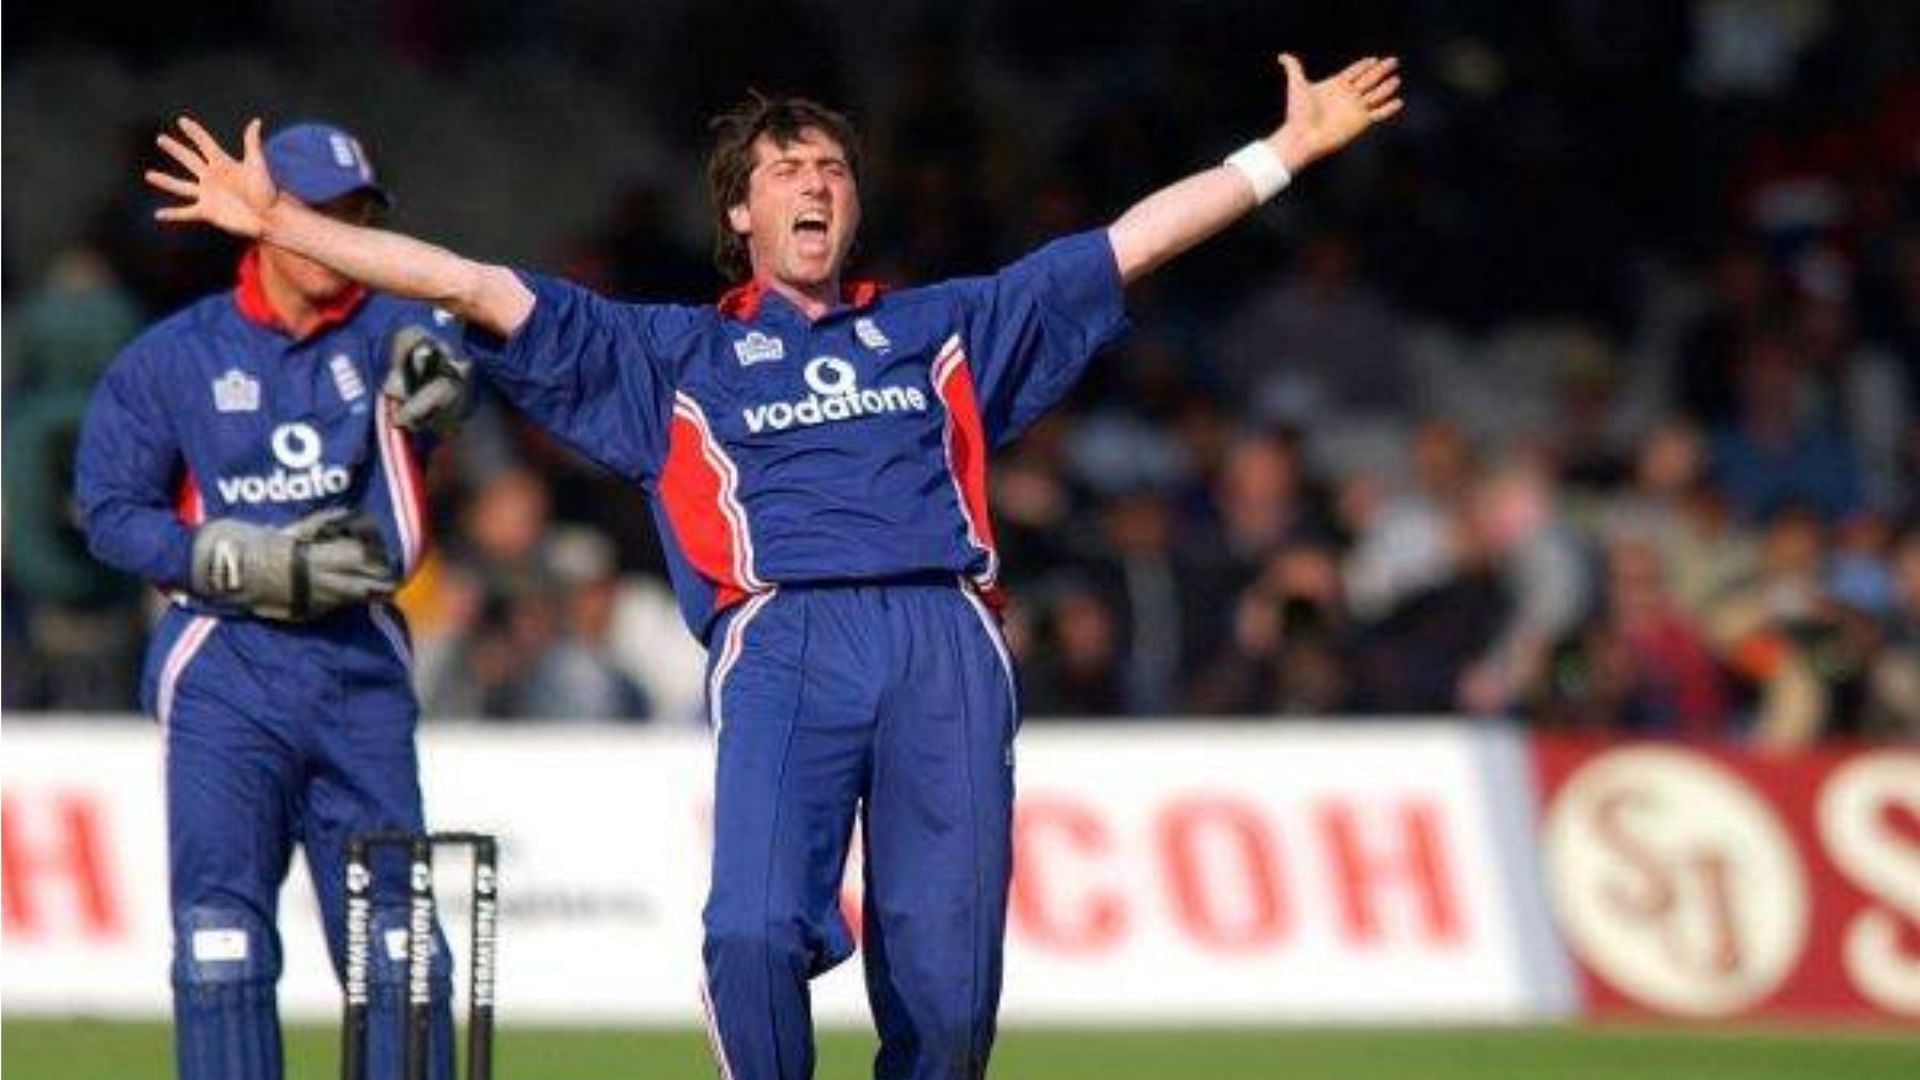 Ronnie Irani produced a magical all-round performance during the Natwest Trophy 2002.